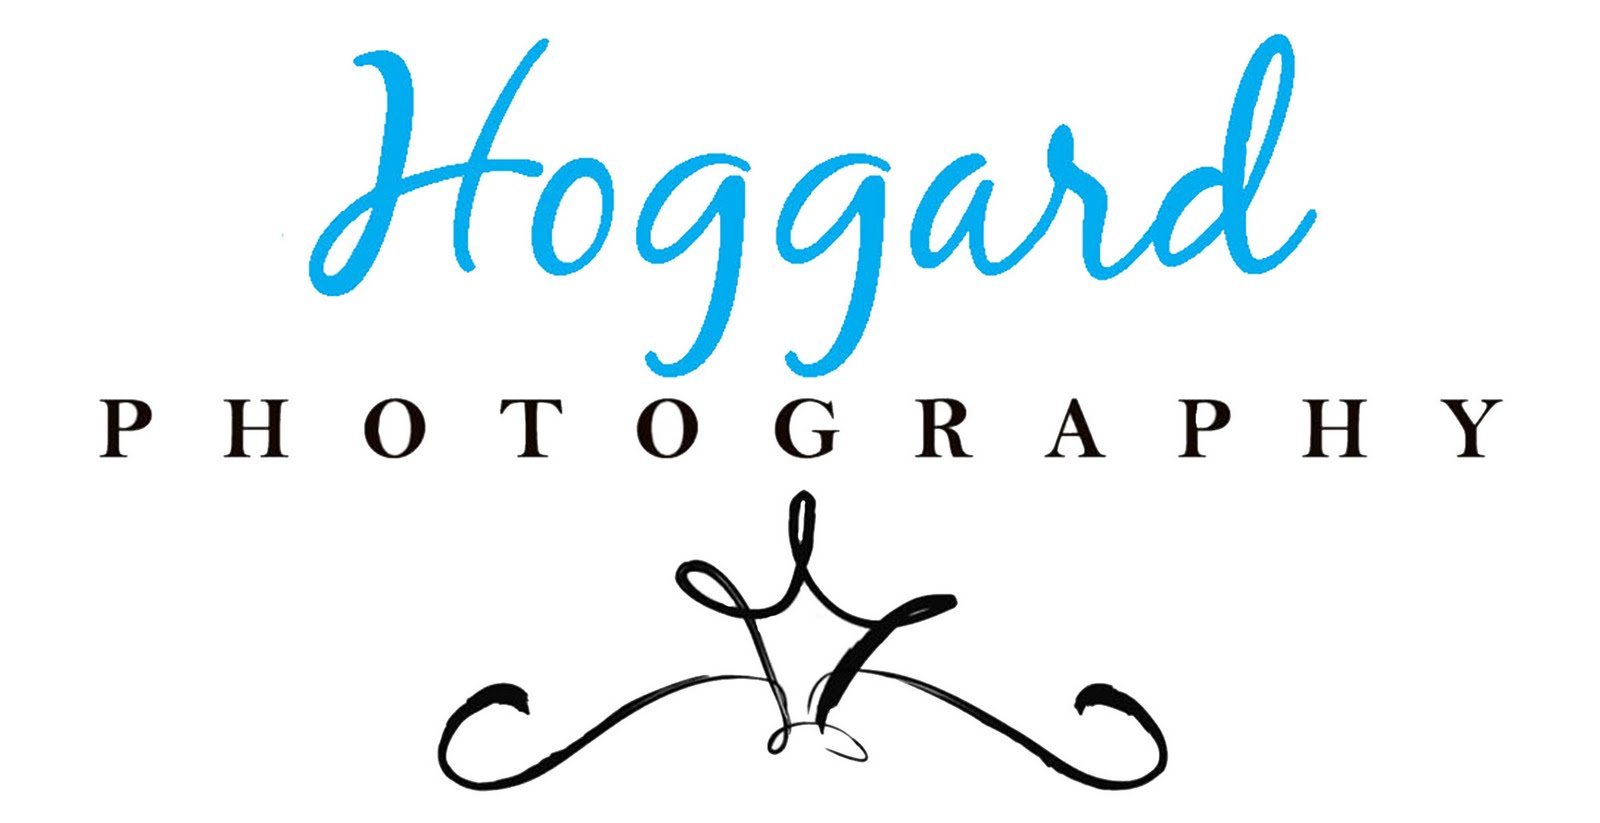 Hoggard Photography- Capturing Life from Behind the Lens.